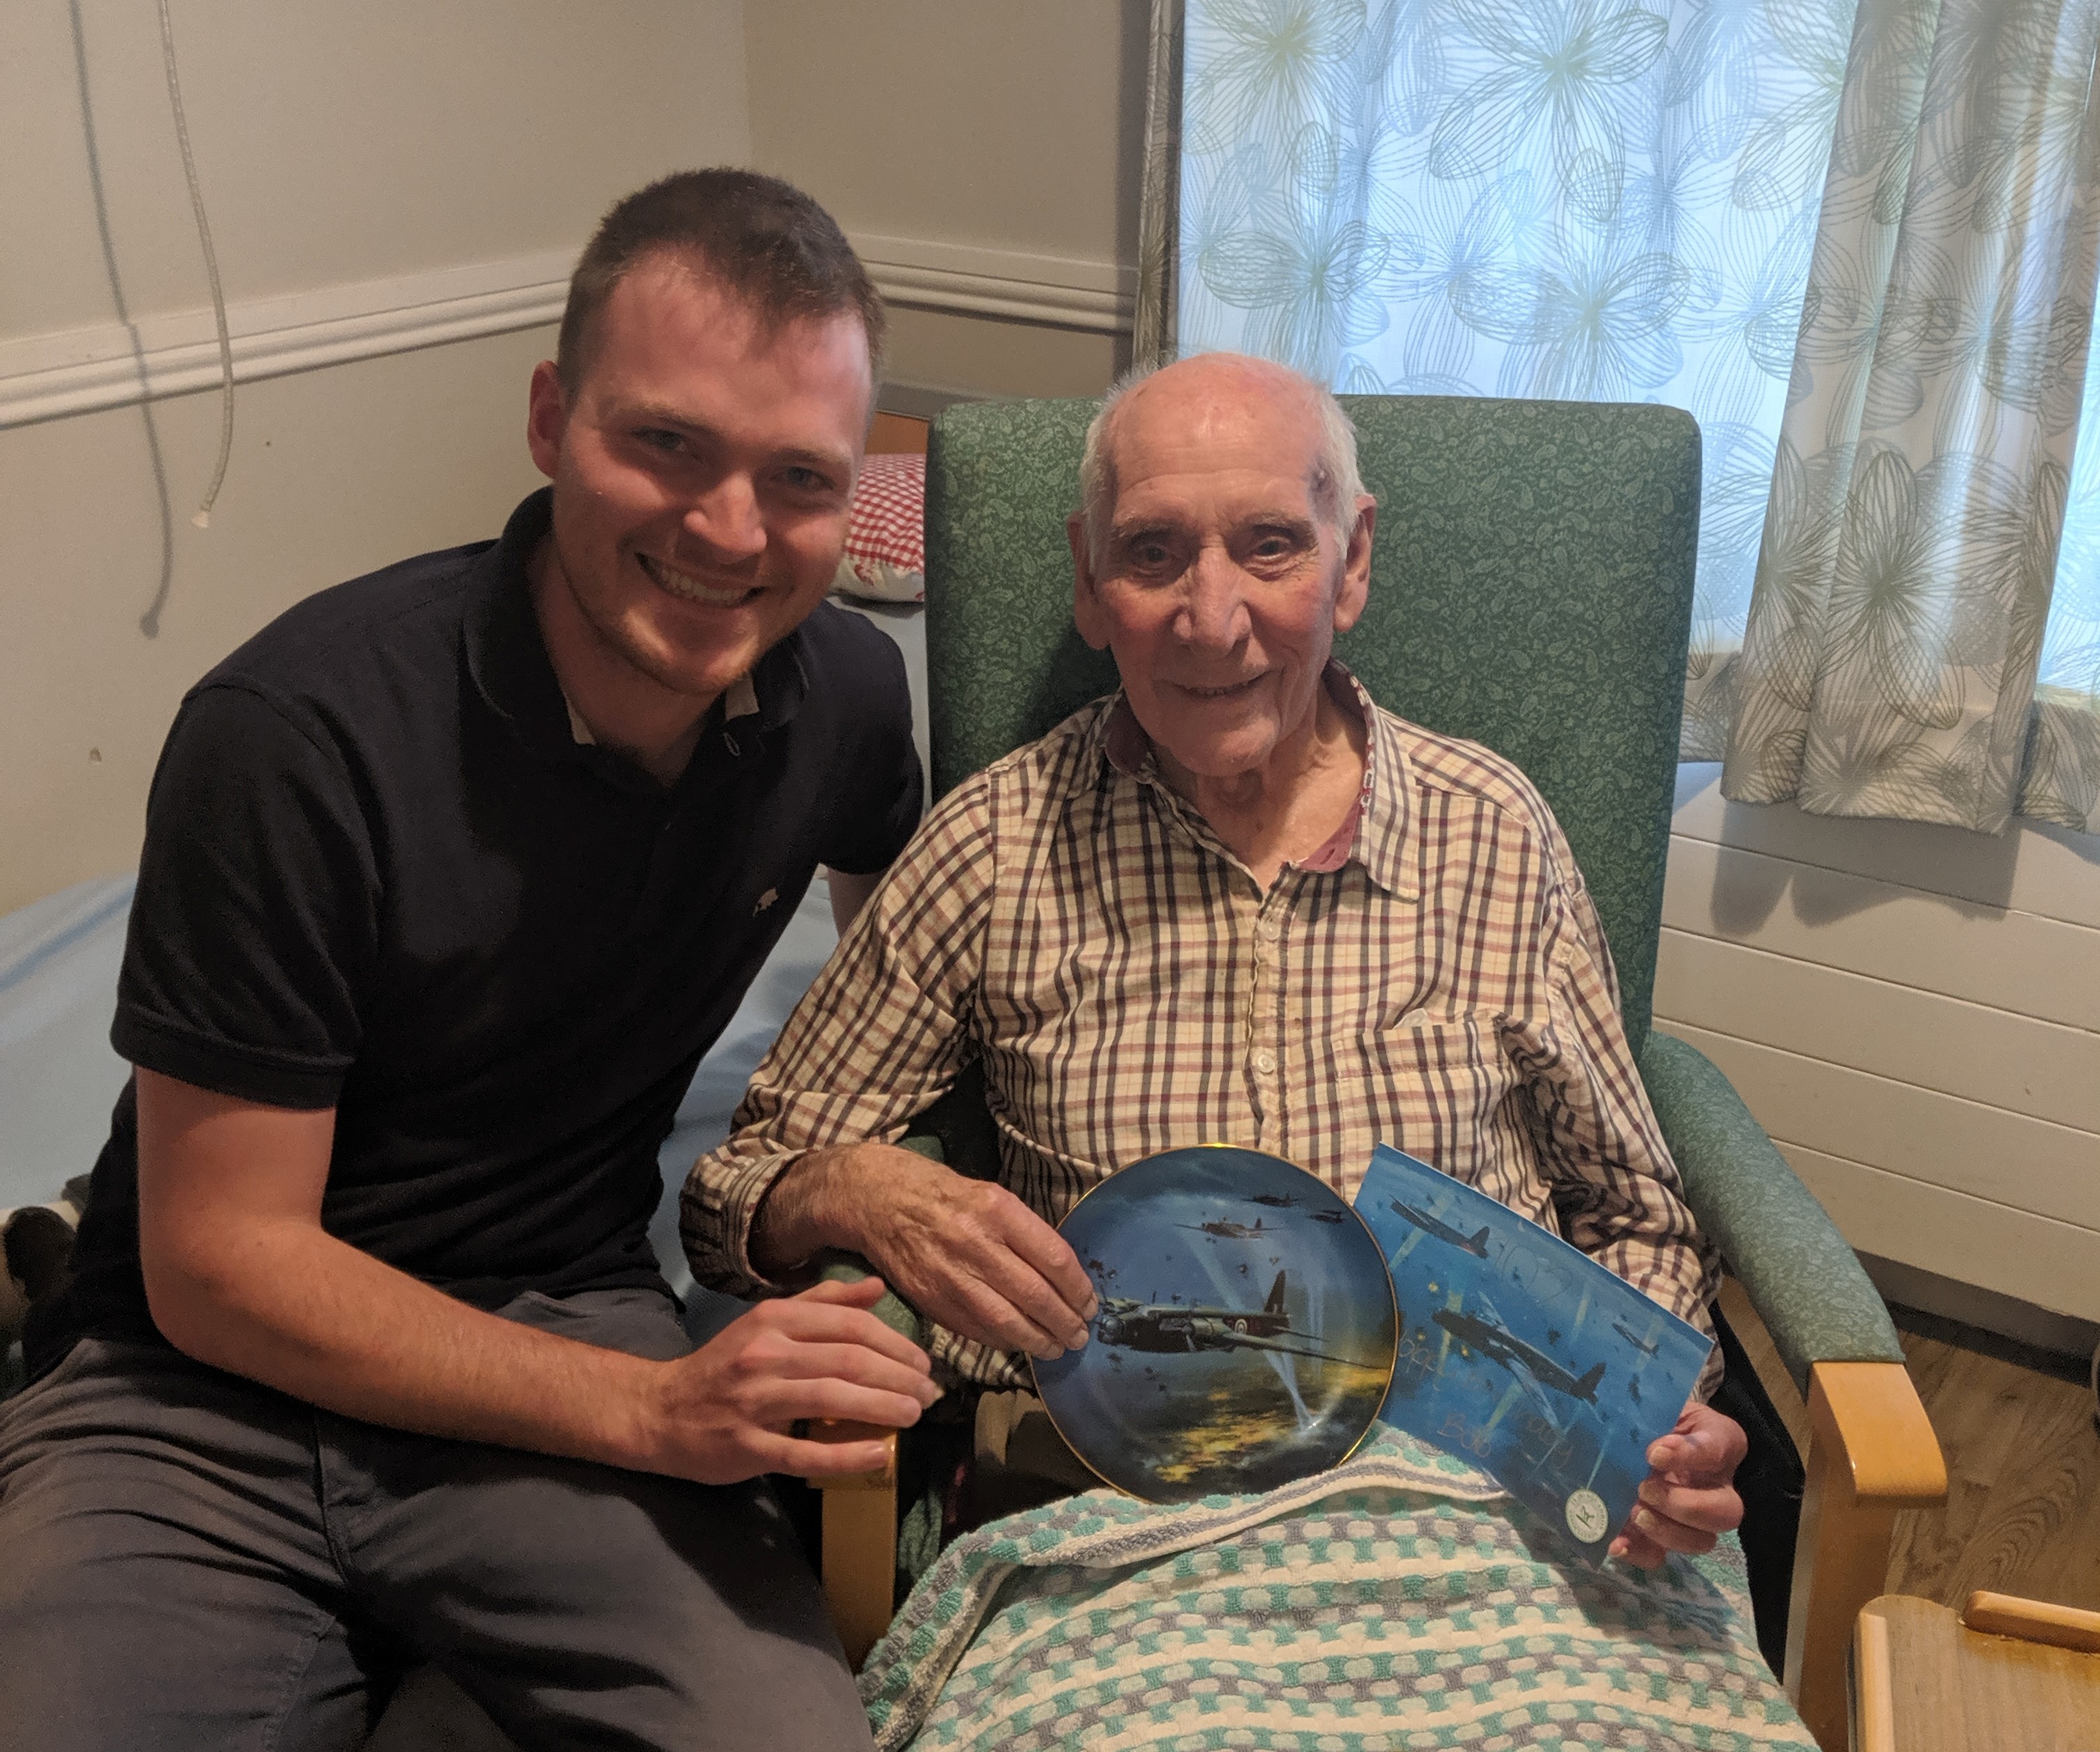 Image shows RAF veteran holding ceramic plate and picture of spitfire aircraft with civilian.